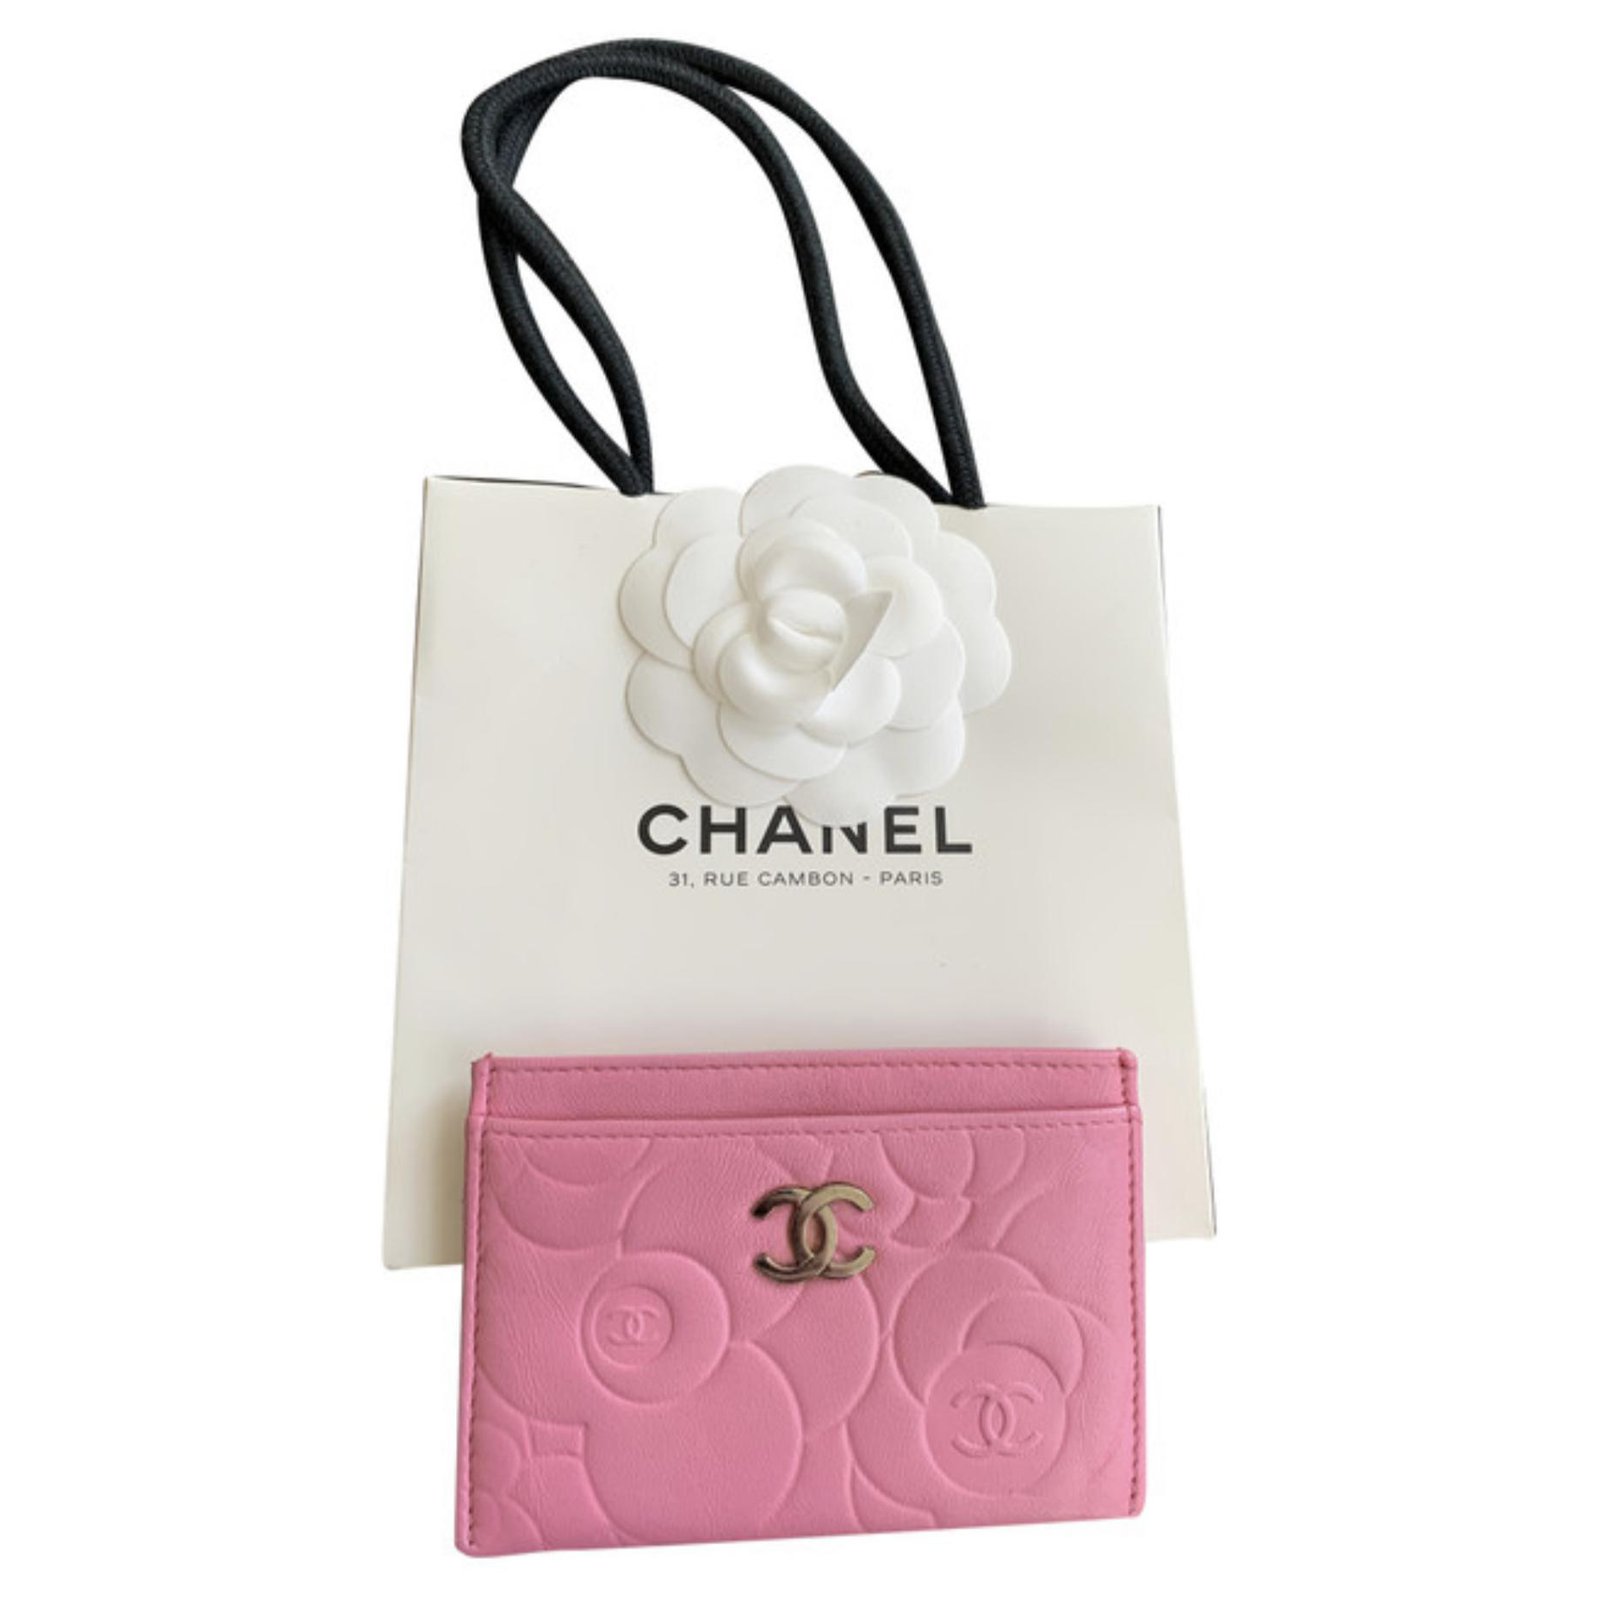 Chanel Camellia phone case and card holder